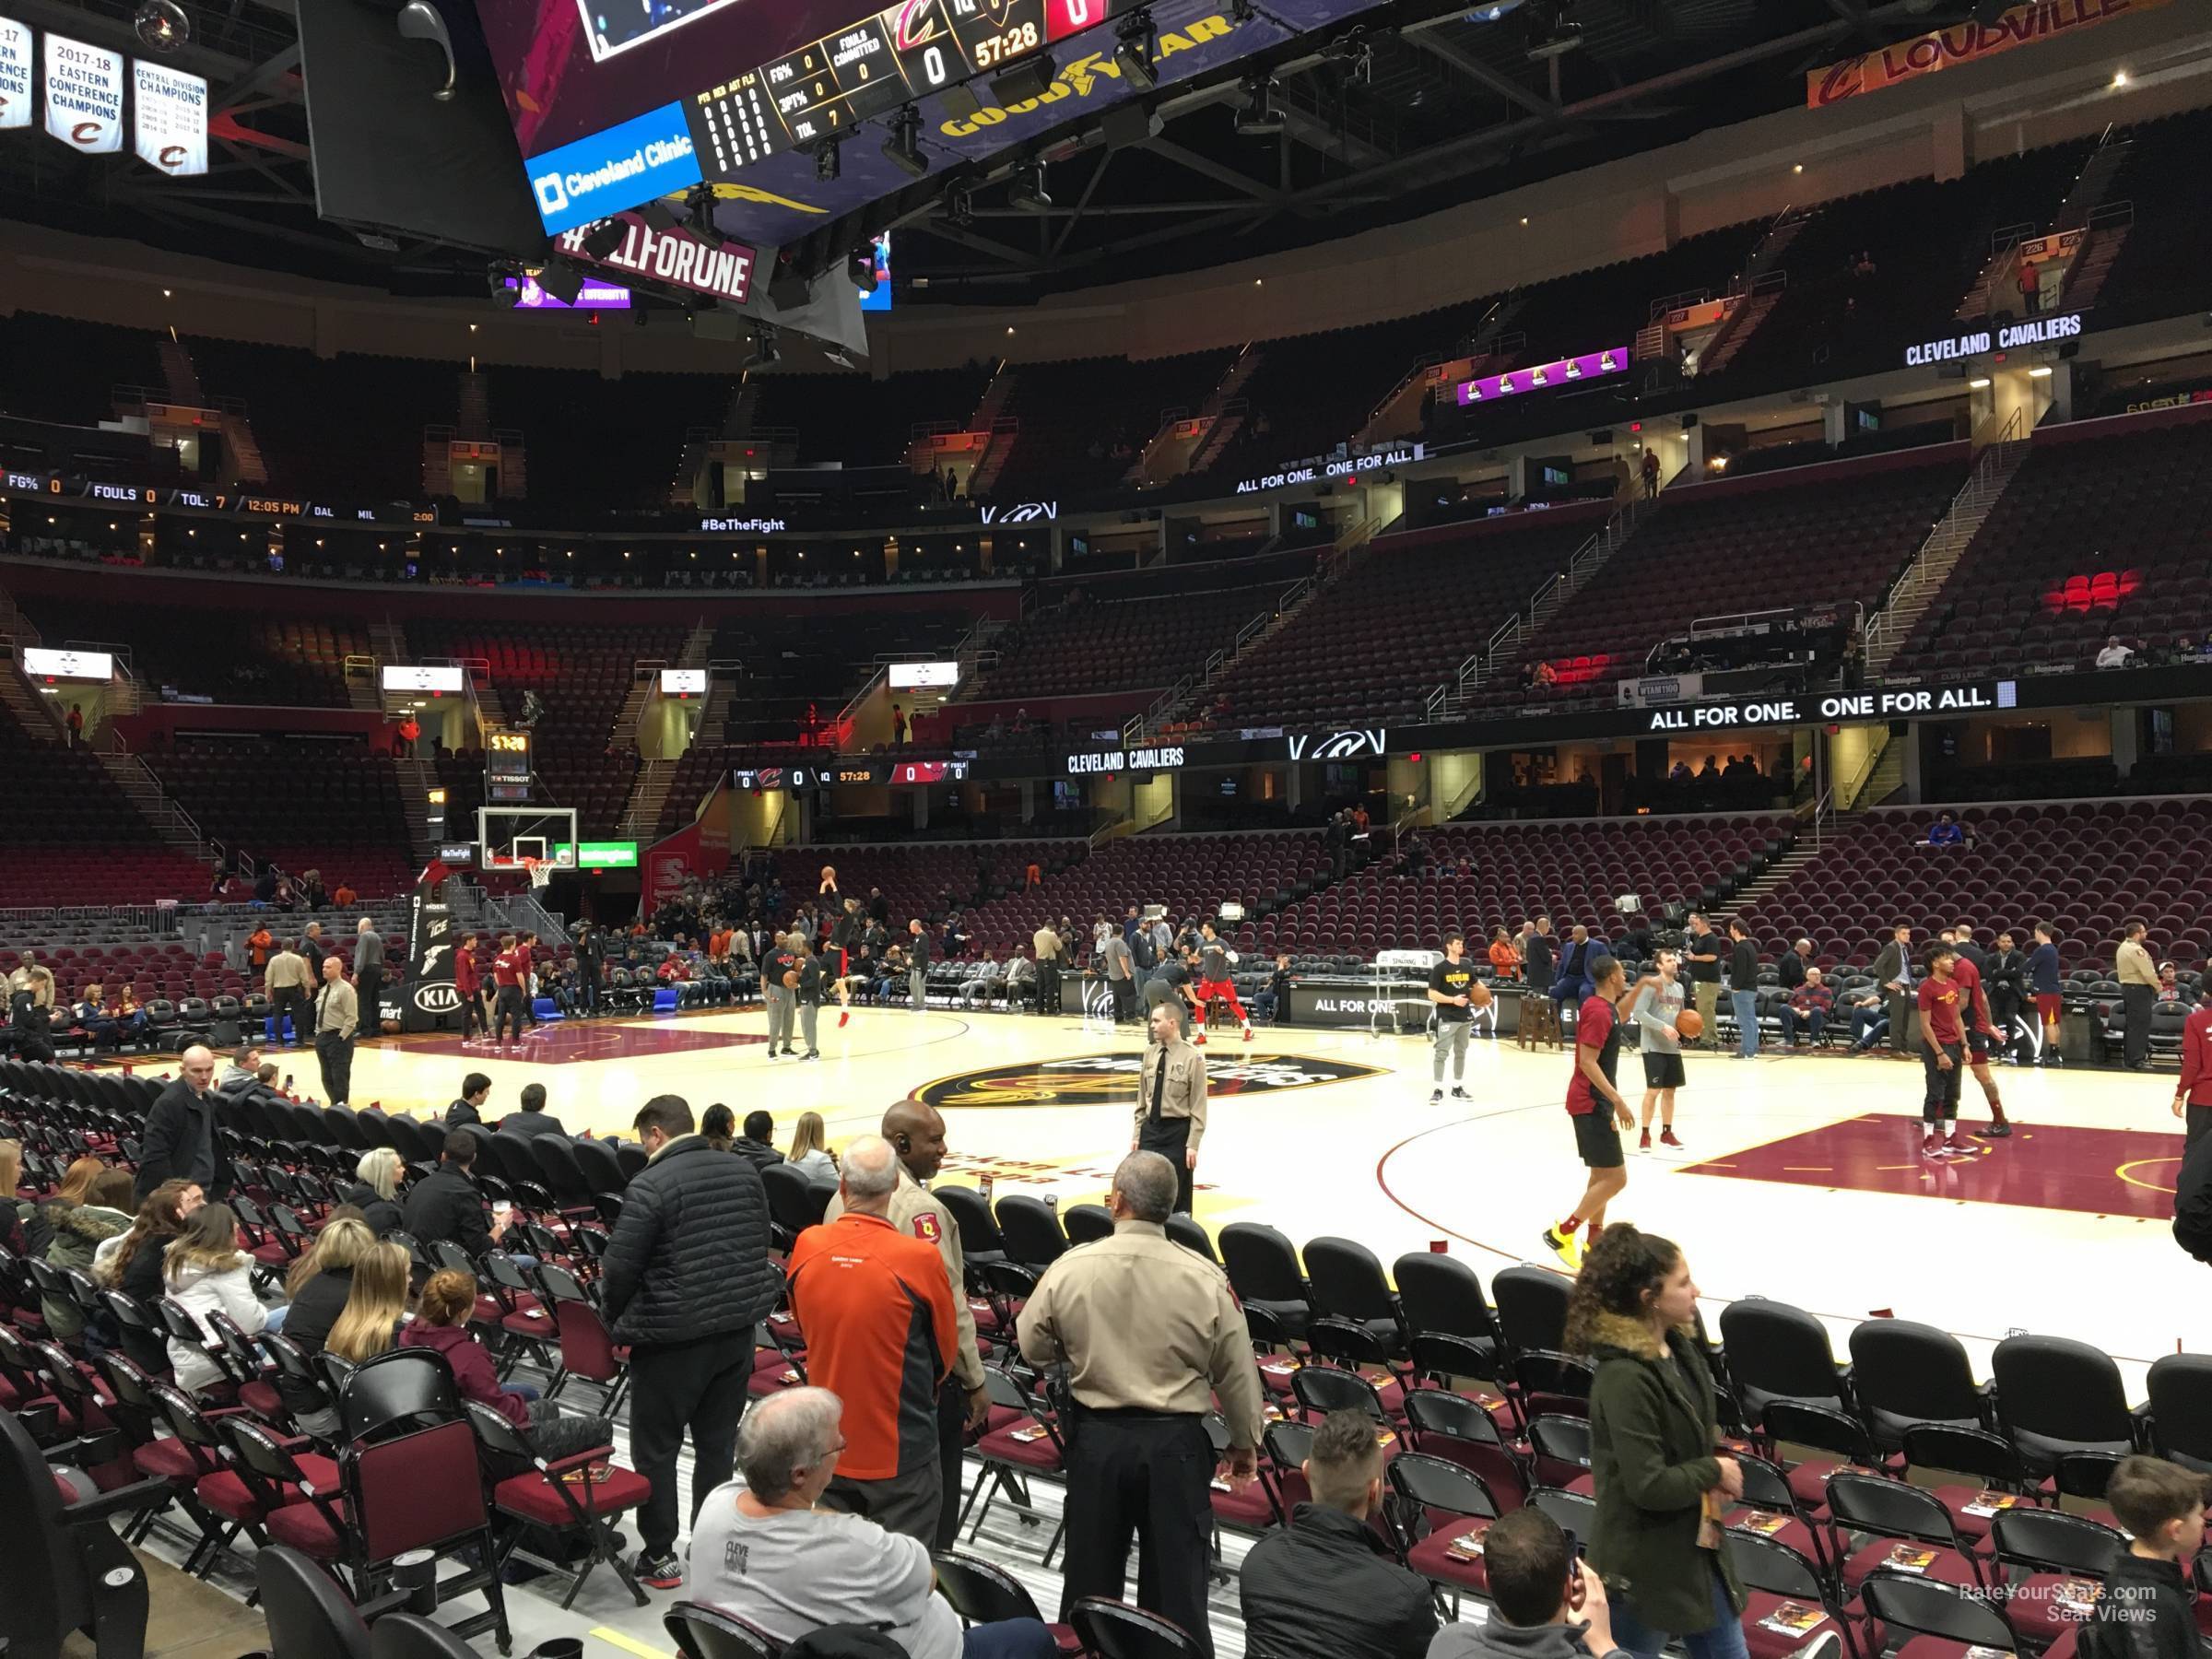 section 119, row 5 seat view  for basketball - rocket mortgage fieldhouse